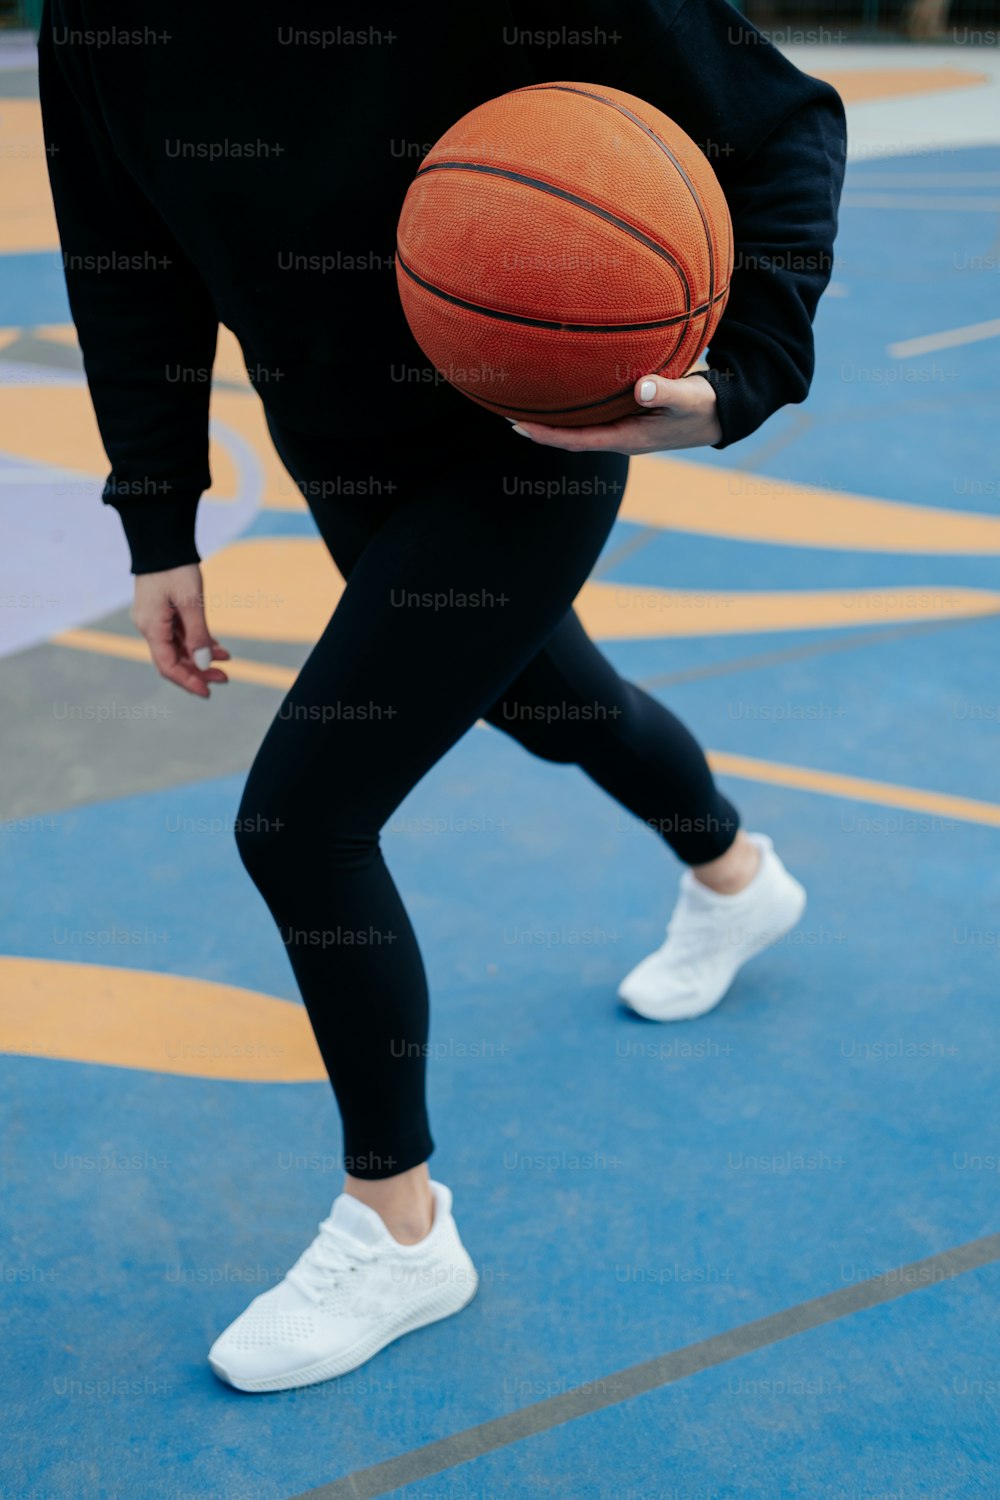 a person holding a basketball on a court